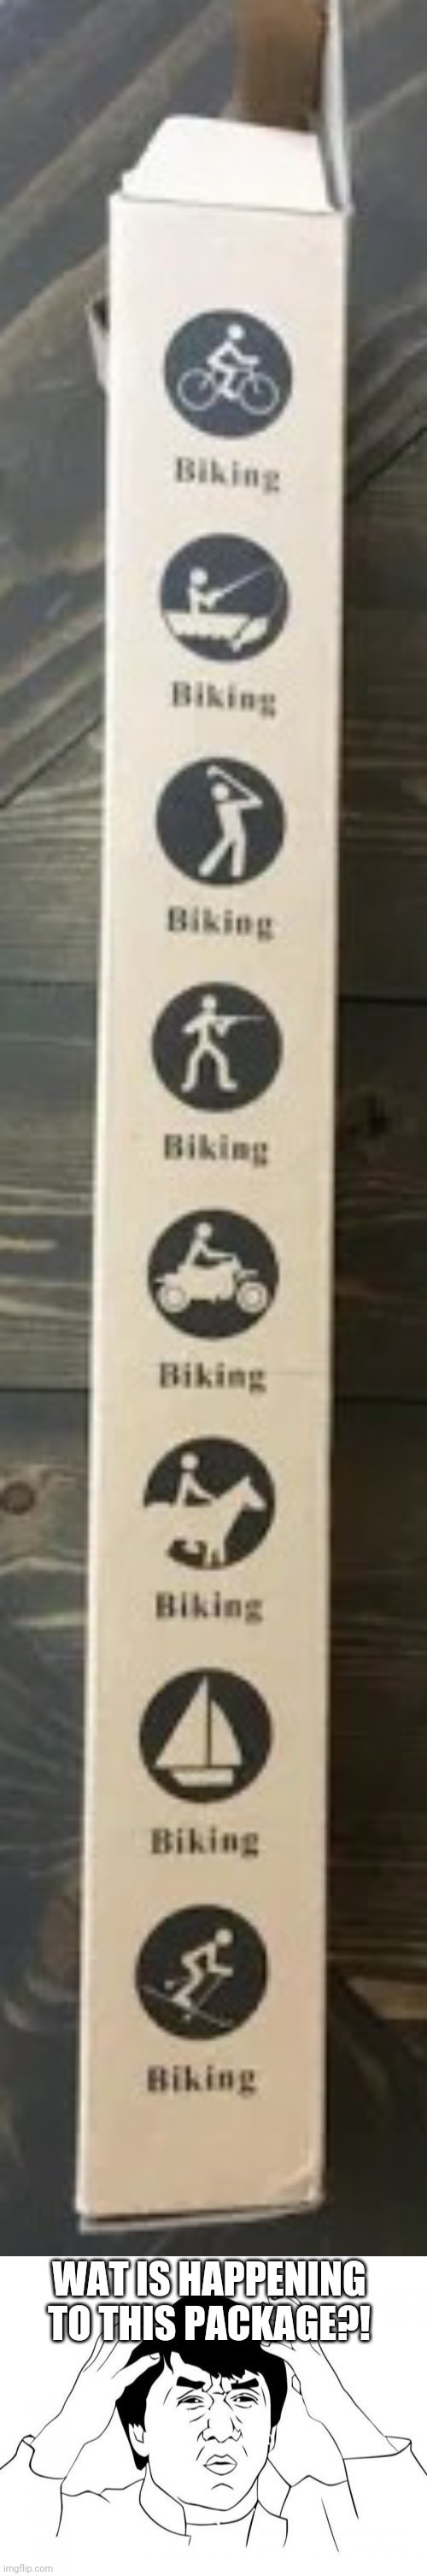 Uh oh! All are Biking Signs because it failed!!! | WAT IS HAPPENING TO THIS PACKAGE?! | image tagged in memes,jackie chan wtf,funny,you had one job,what a terrible day to have eyes,cursed image | made w/ Imgflip meme maker